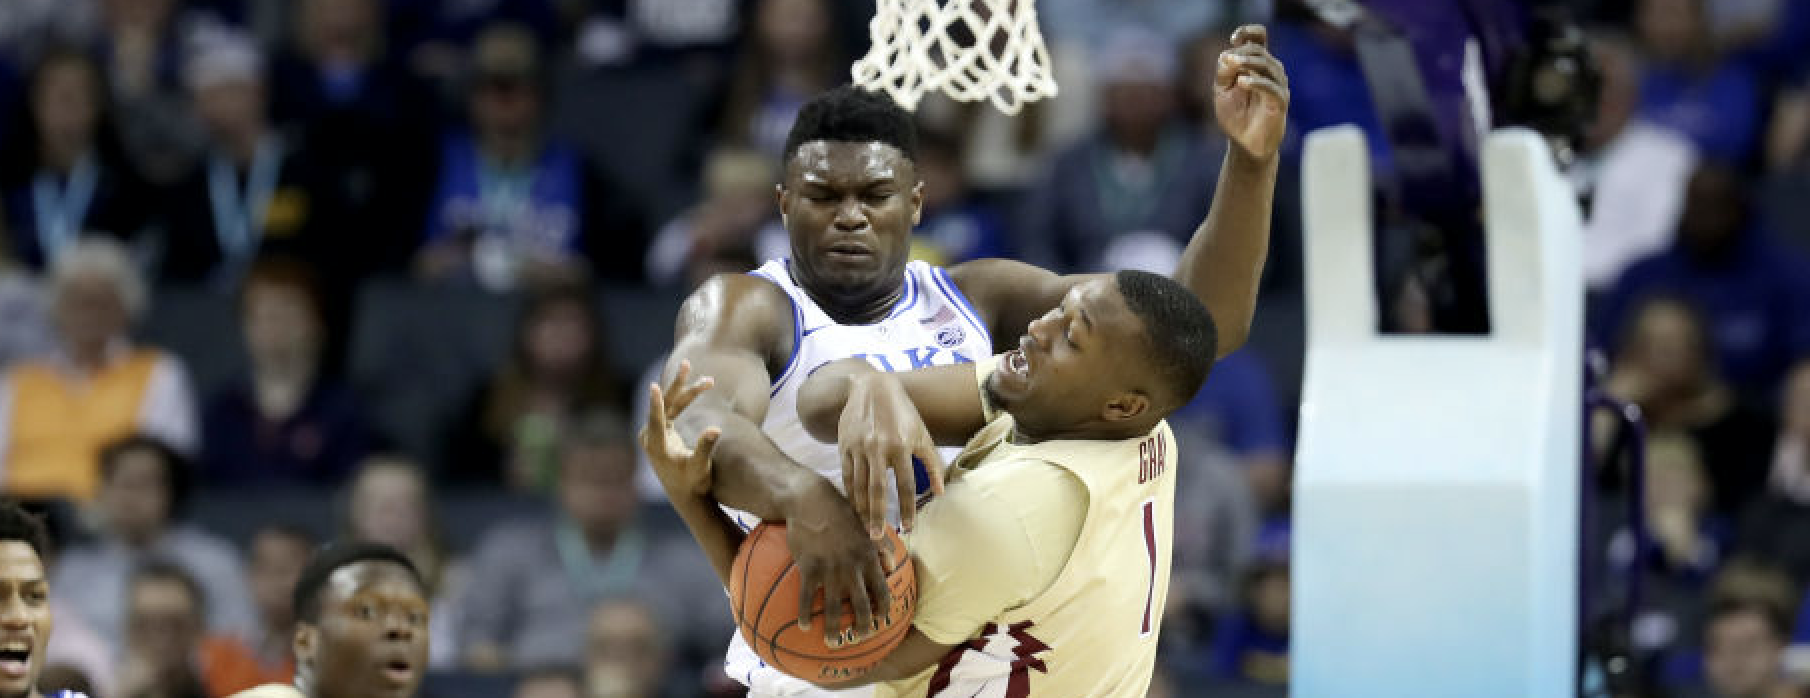 Zion Williamson blocks a shot by Raiquan Gray (Photo by Streeter Lecka/Getty Images)